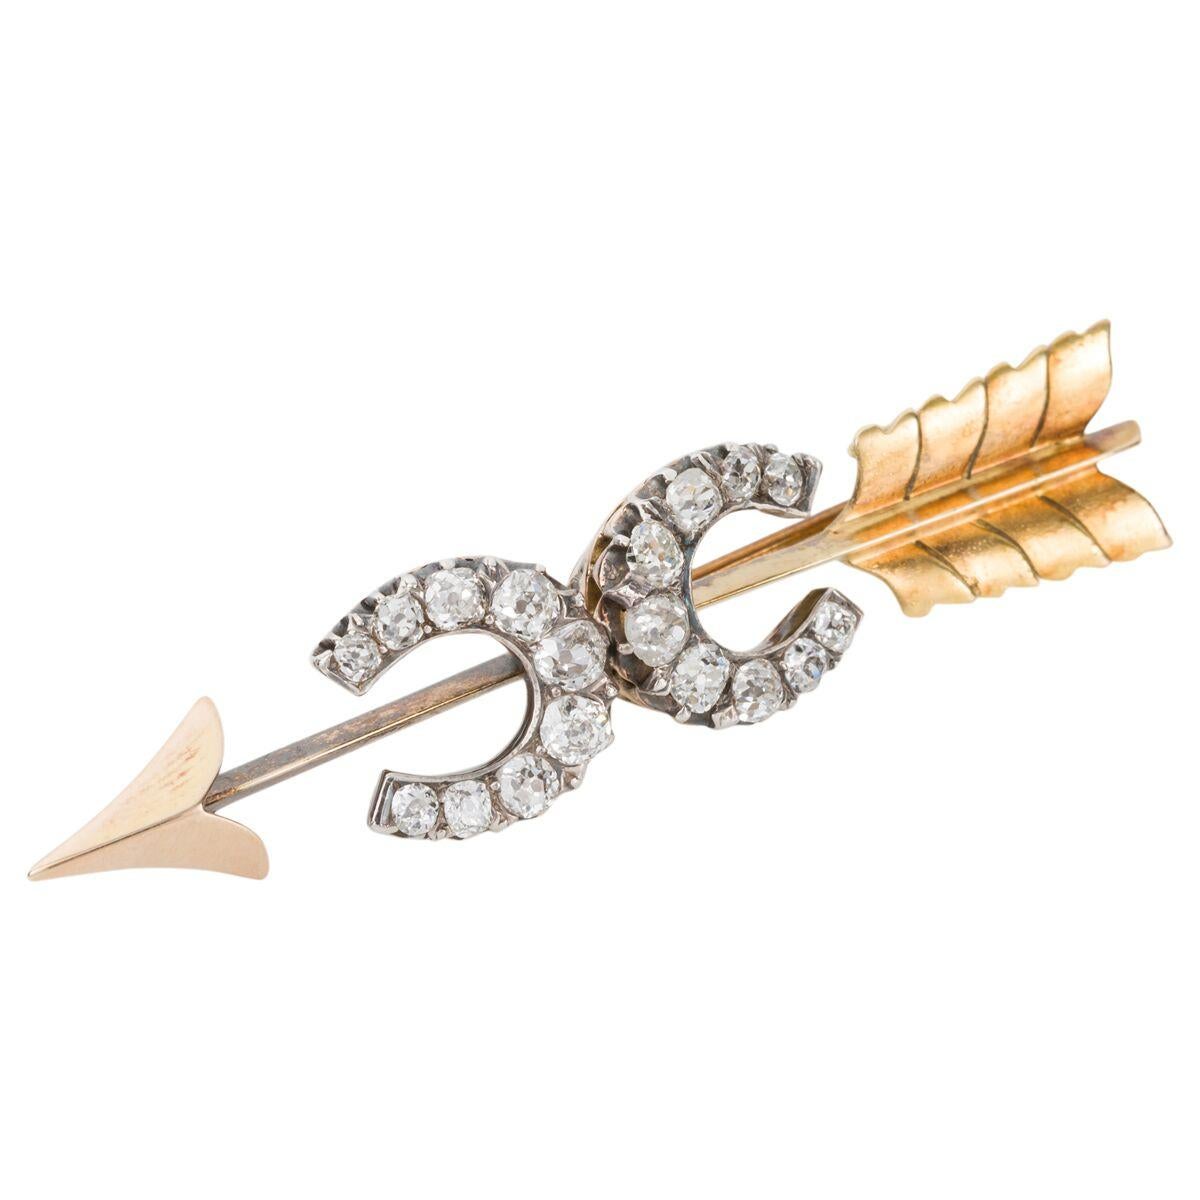 A beautiful brooch, it looks fabulous on any jacket or coat. In fact this piece would also look great on a men's jacket or tie, it's very stylish and certainly eye catching. Central to the brooch is a double horseshoe motif set with bright and